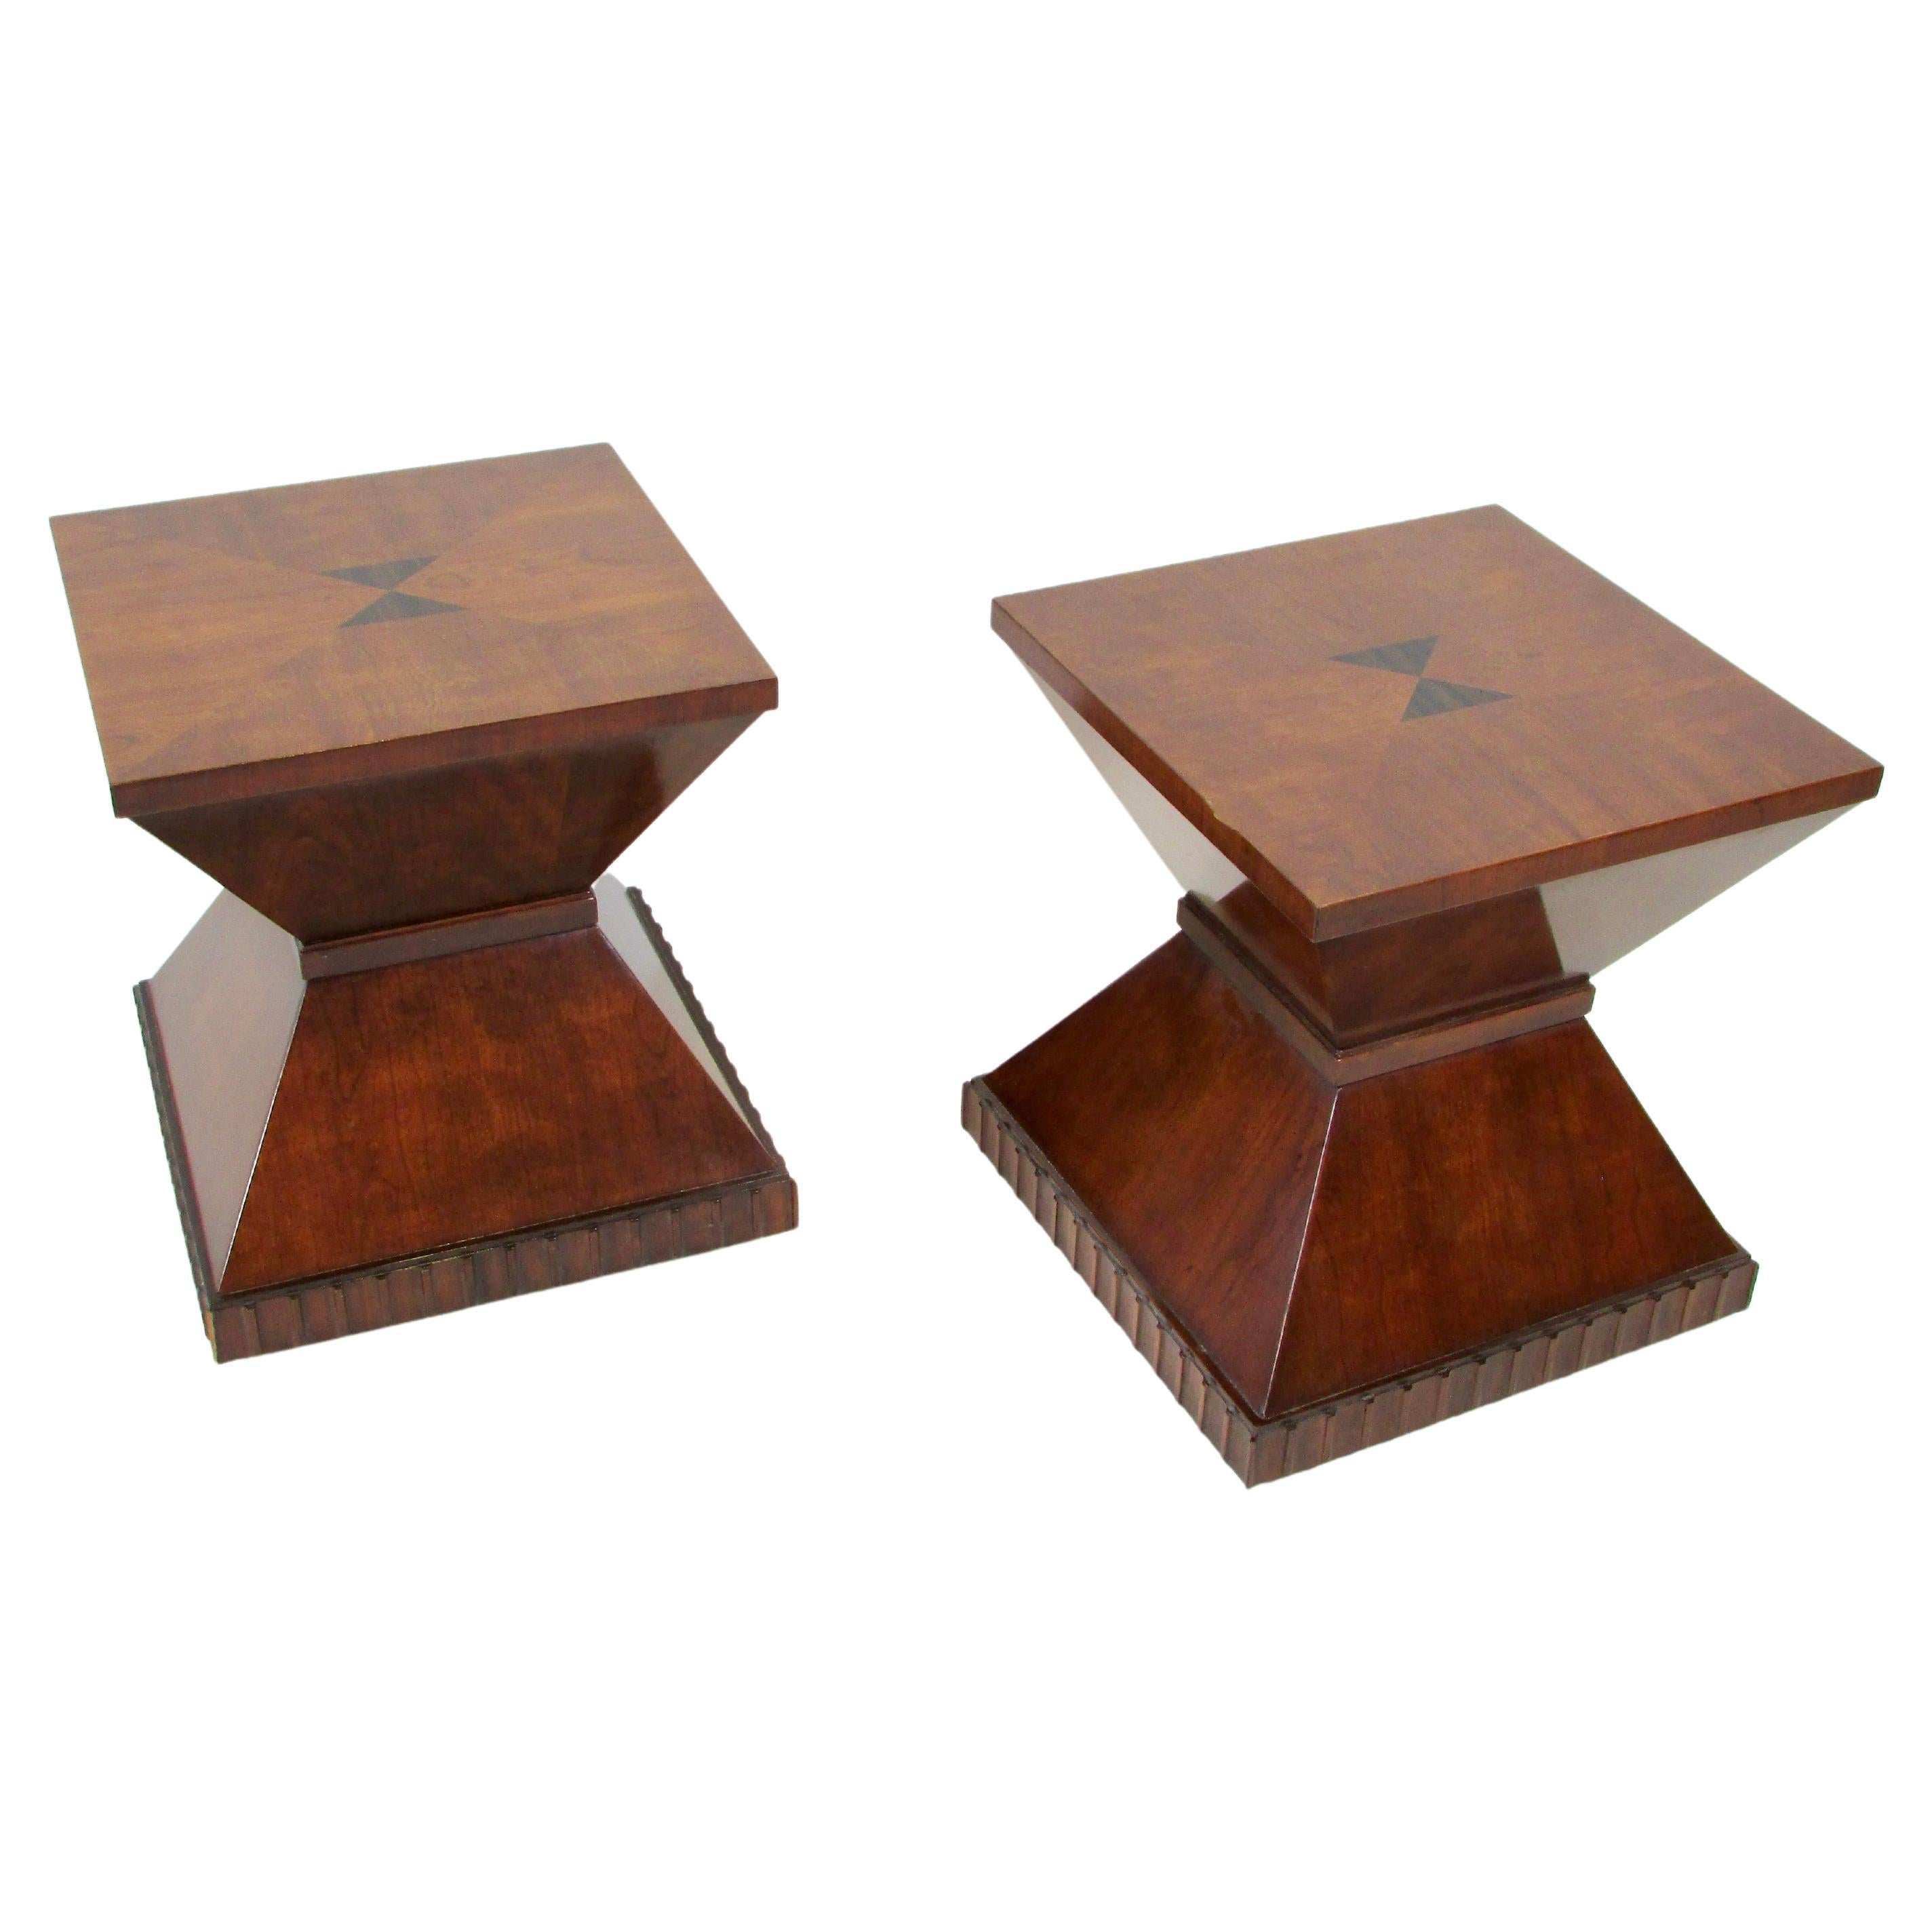 Pair of Neo Classic Henredon square side tables with scallop edge base